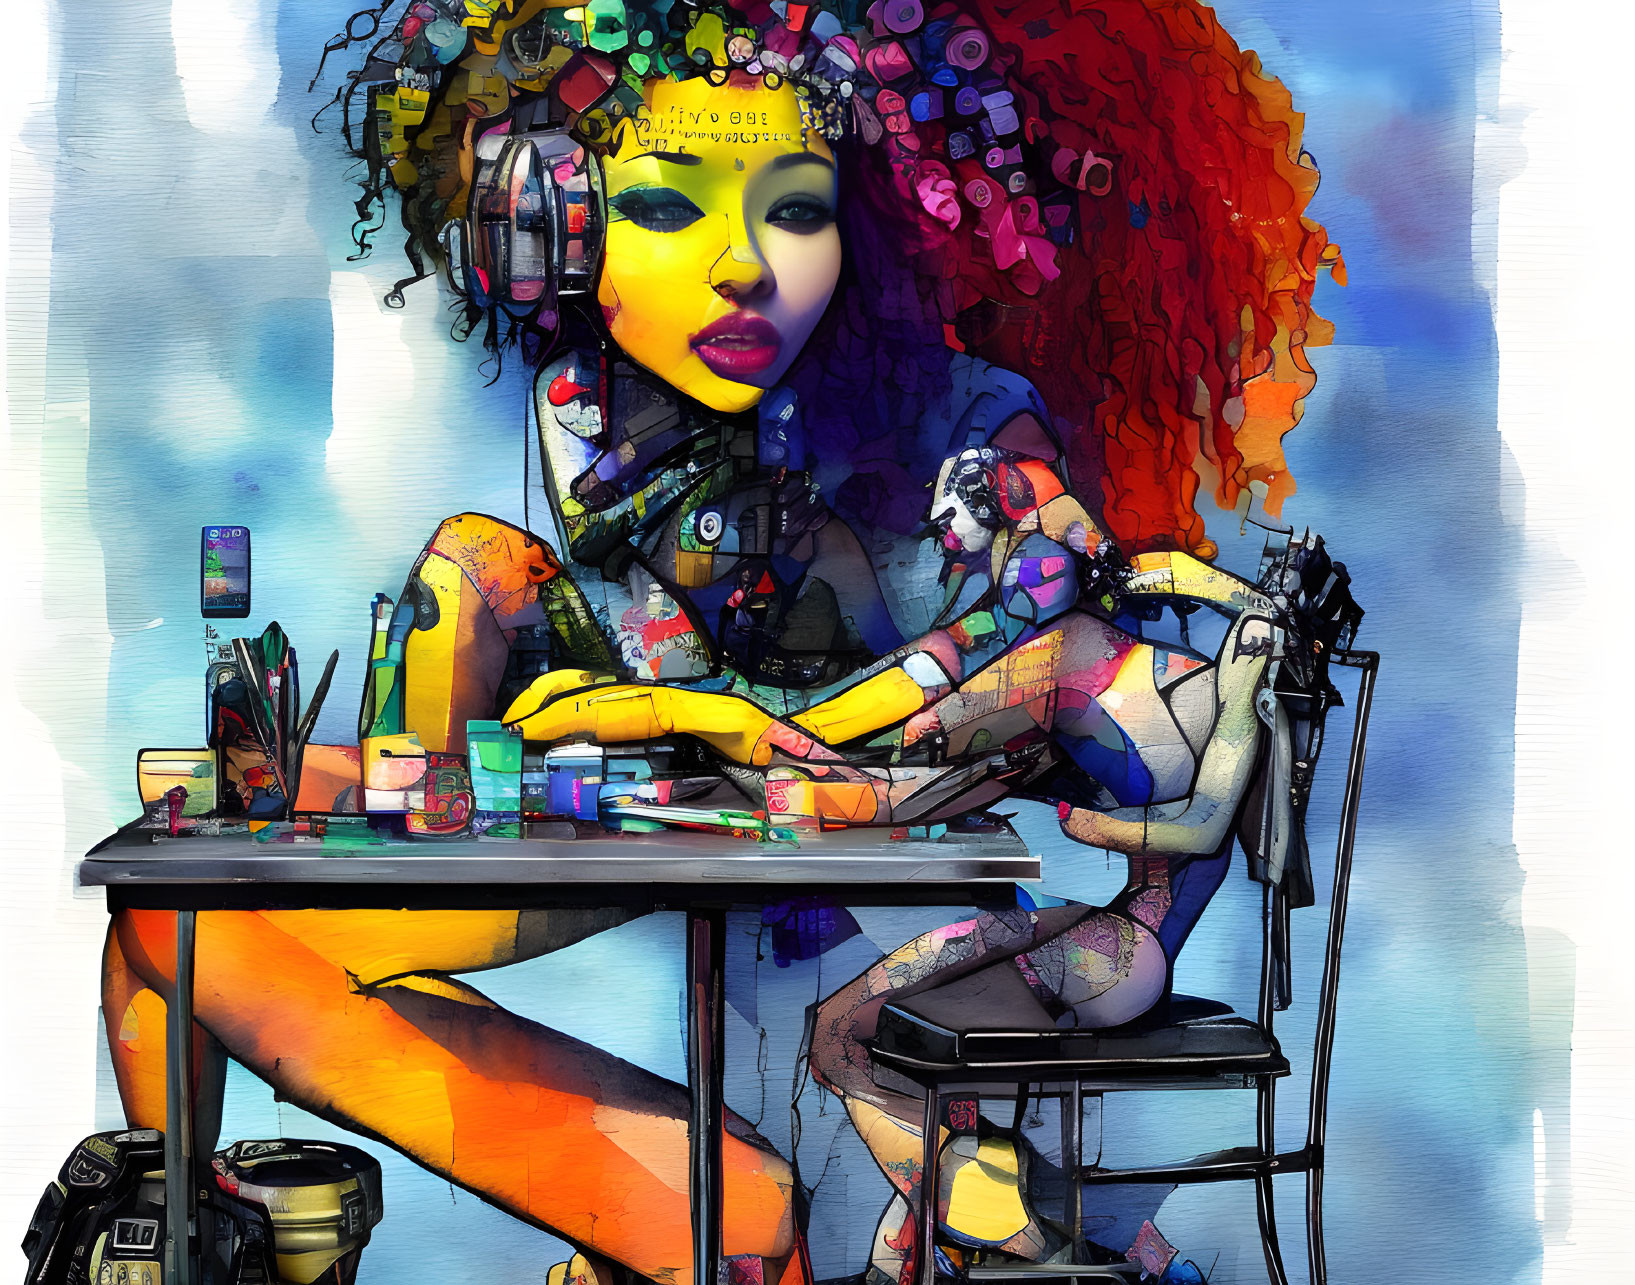 Vibrant cyborg woman with mechanical parts and colorful hair at desk.